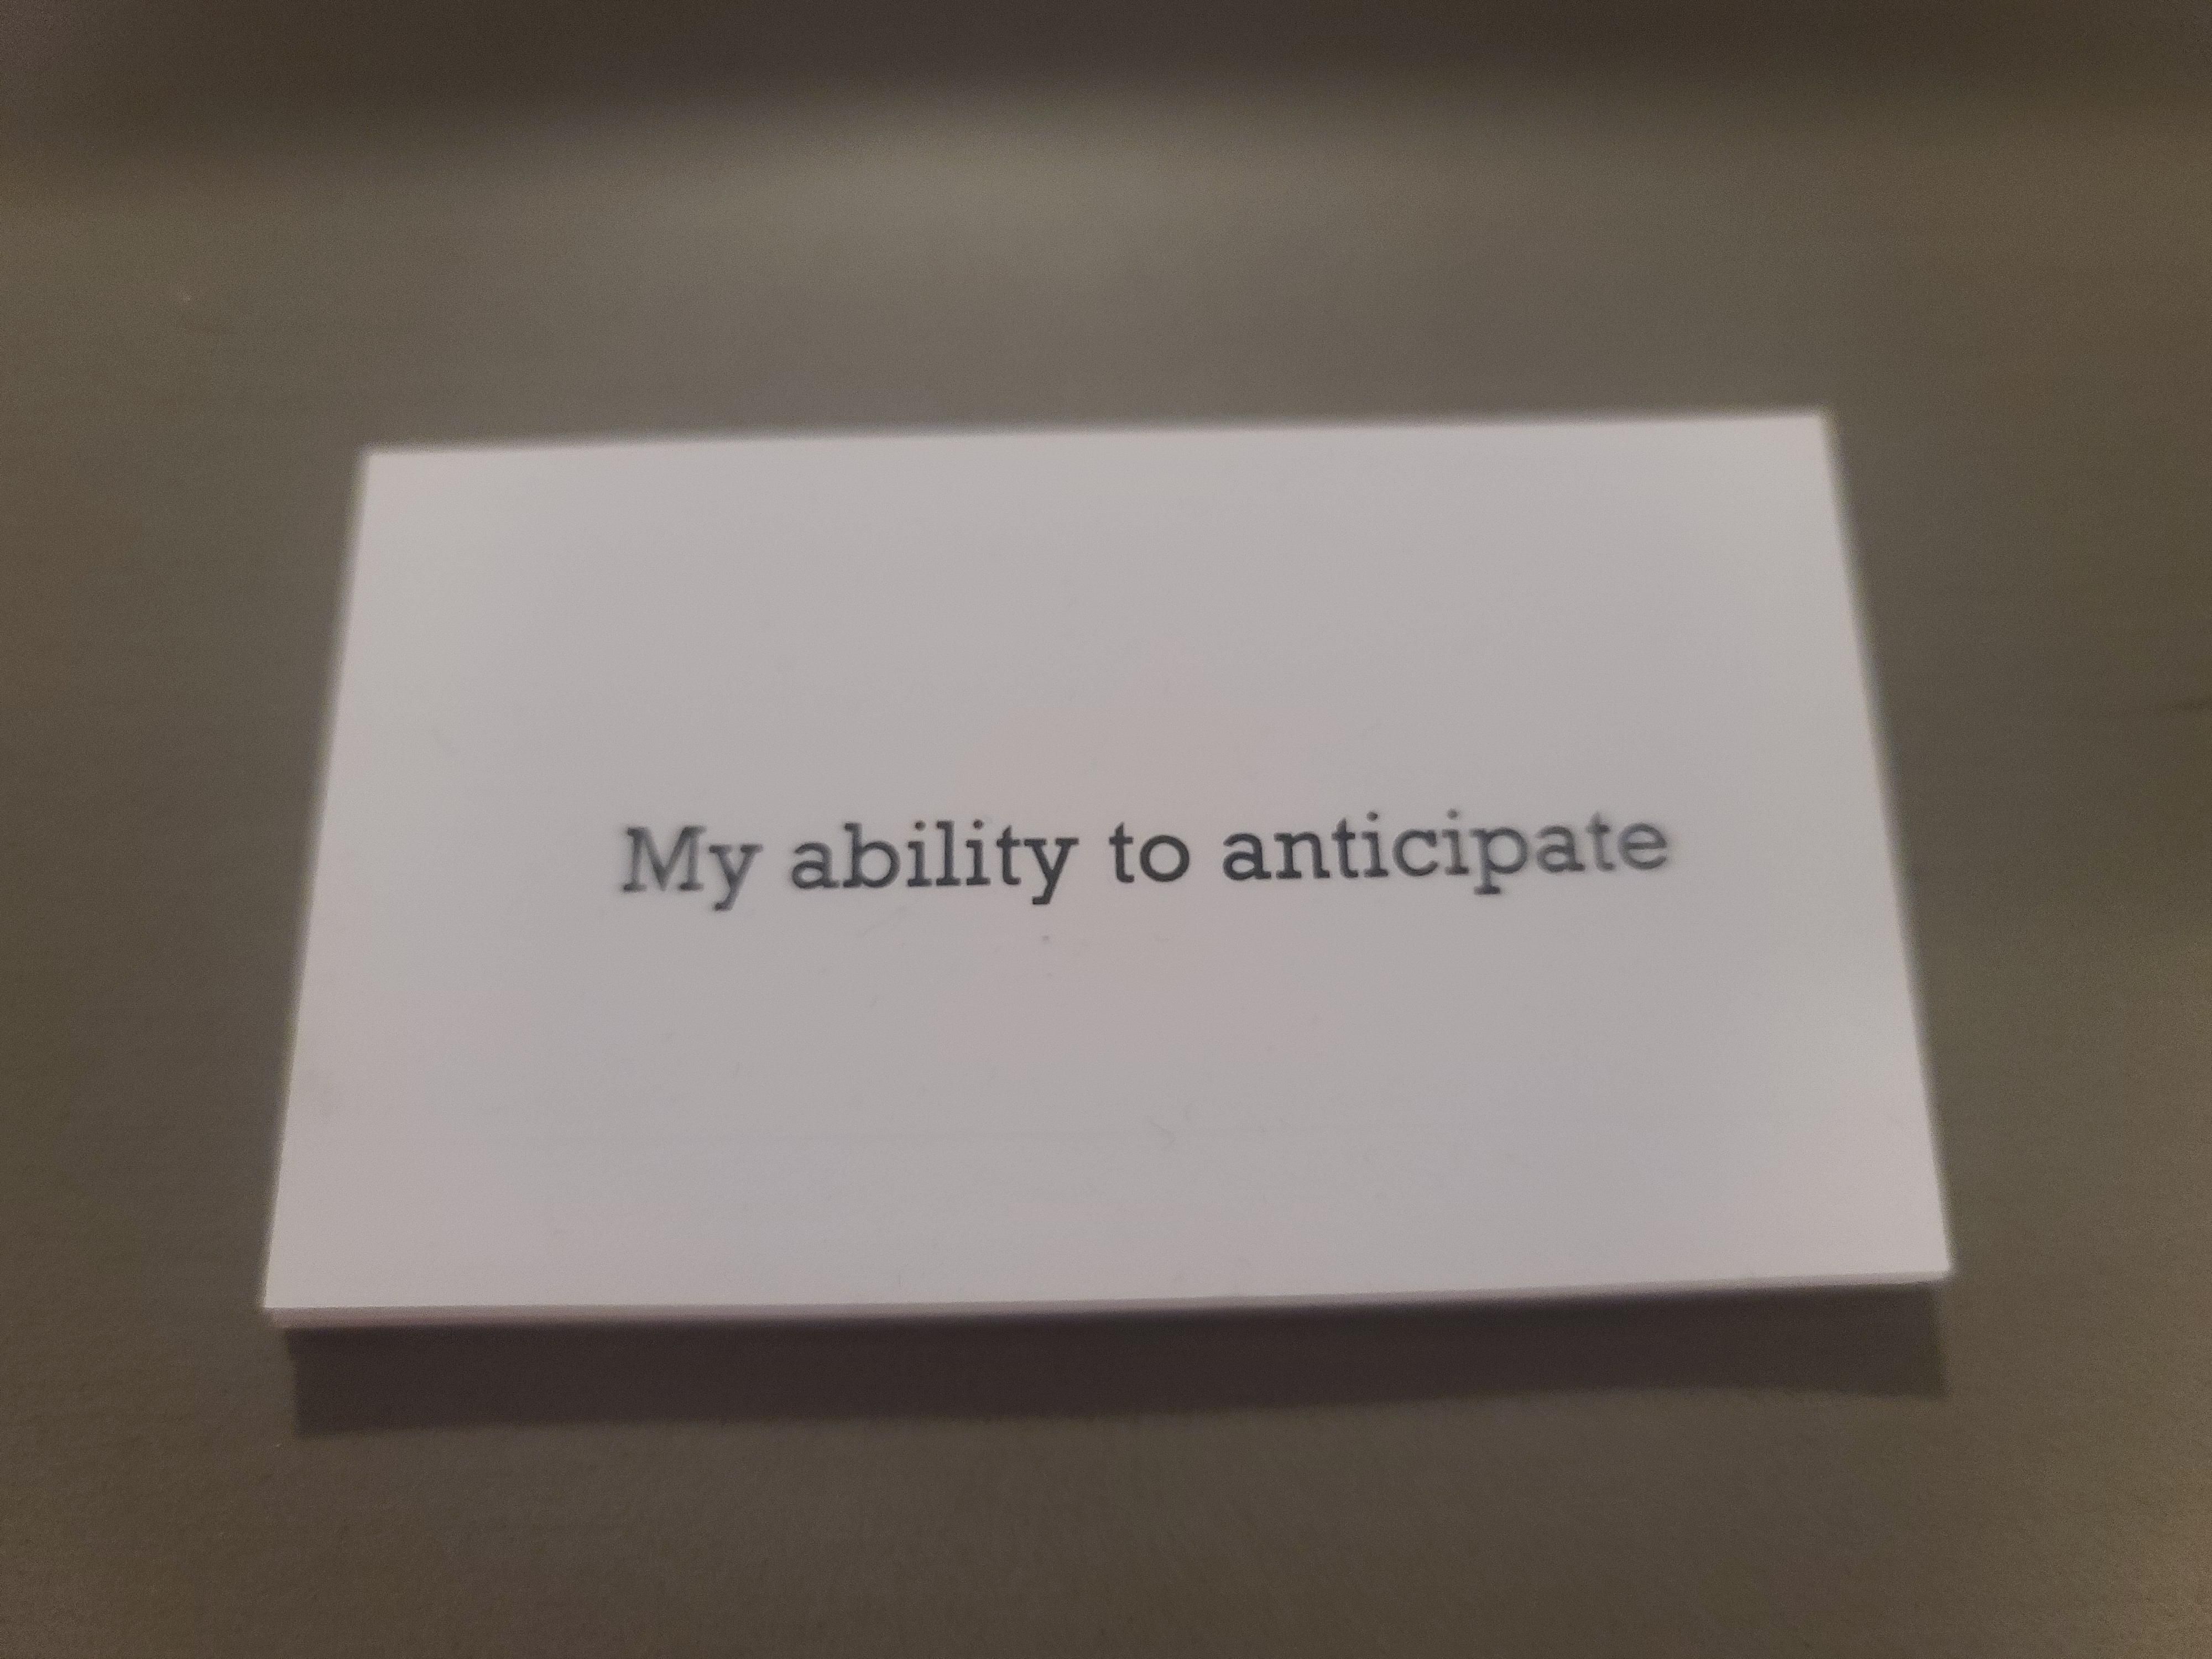 I hate it when job interviewers ask "what is your greatest strength," so I printed up these business cards to just hand out when asked.